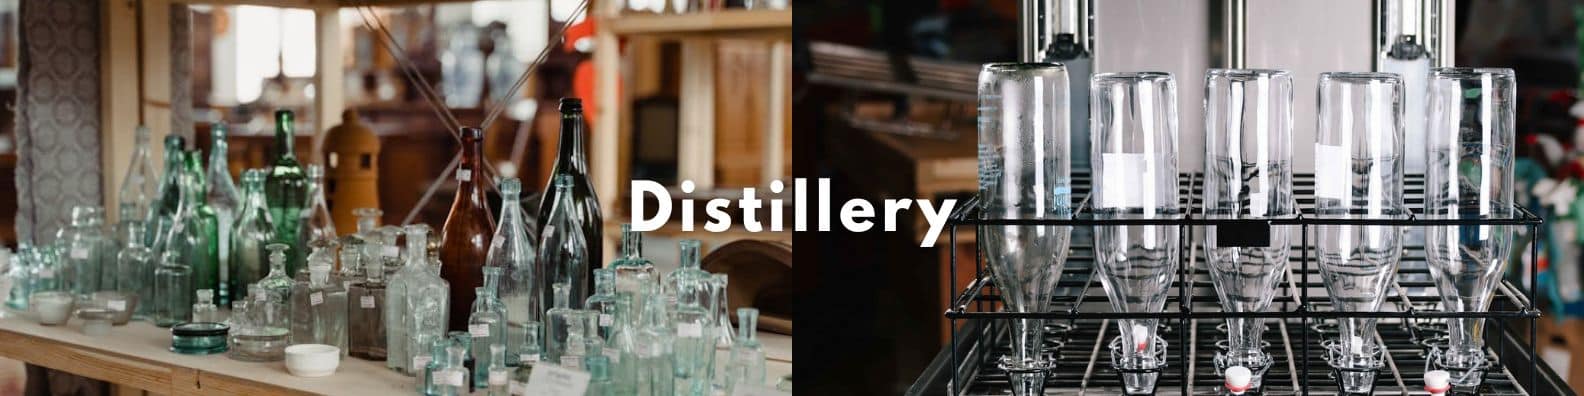 The glasses and bottles from the distilleries are clean, respecting the laws and standards of health and hygiene thanks to a thorough washing with a bottle washing machine